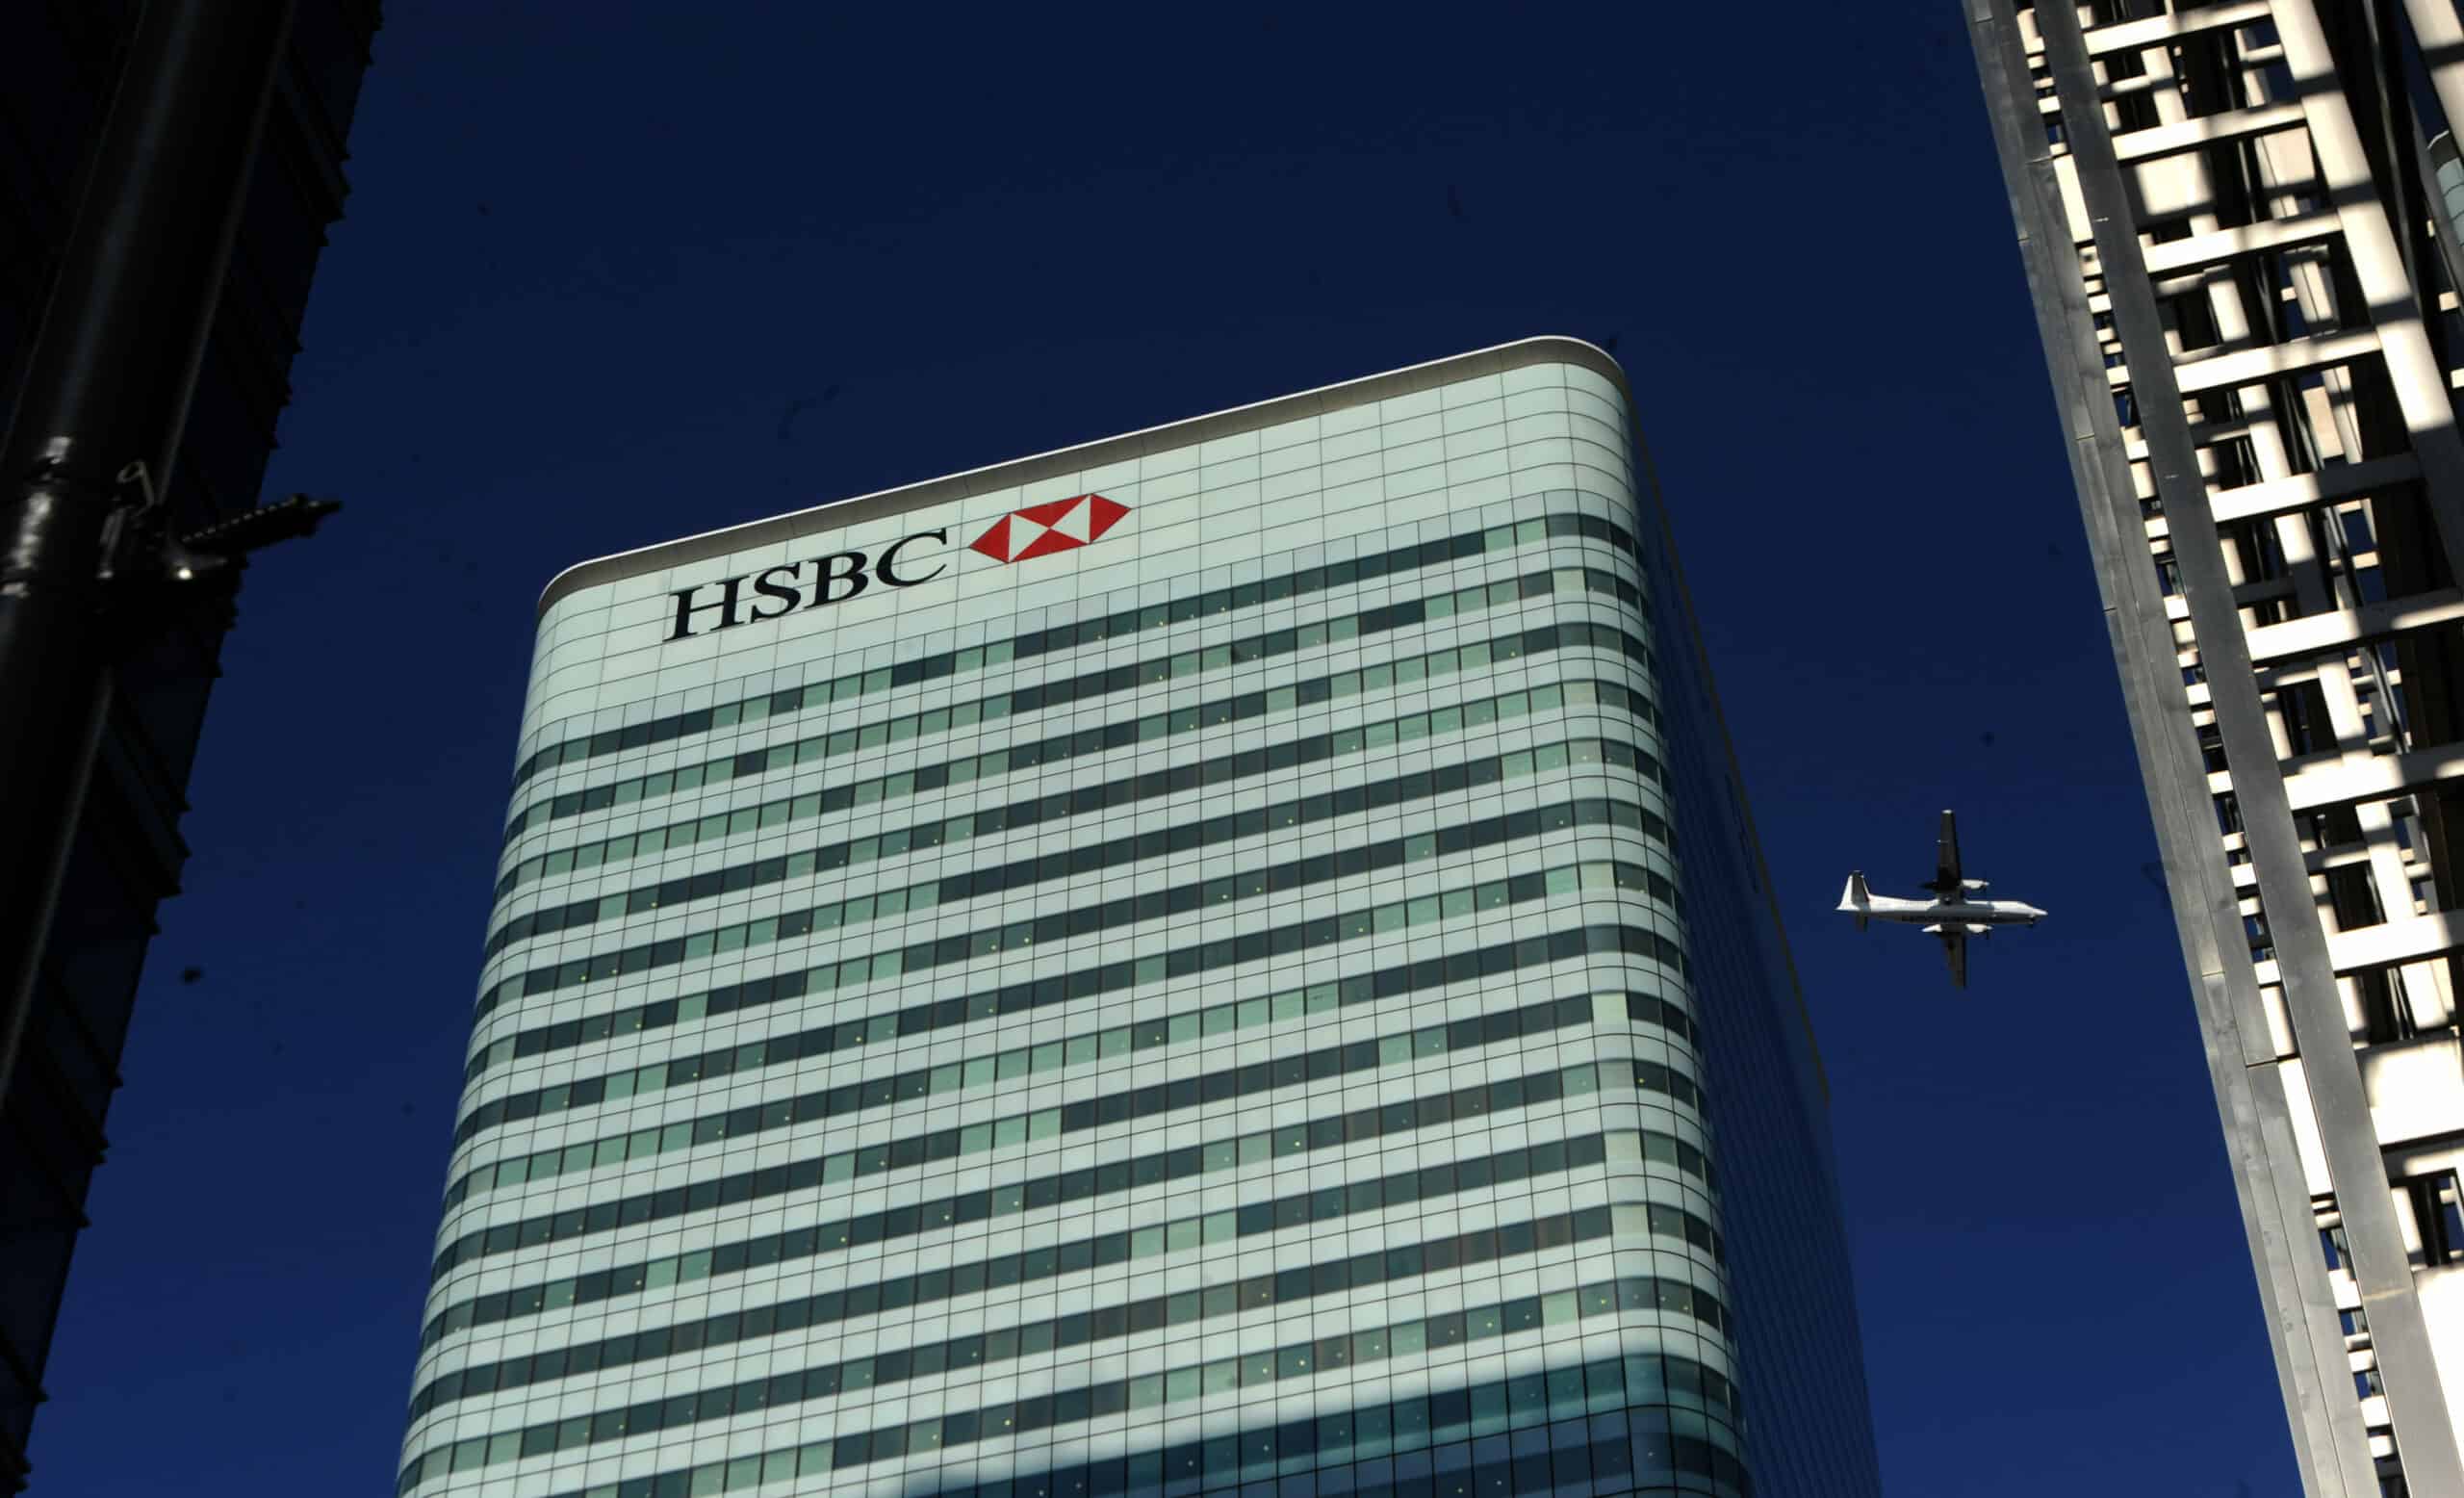 HSBC sees profits more than double on rising interest rates